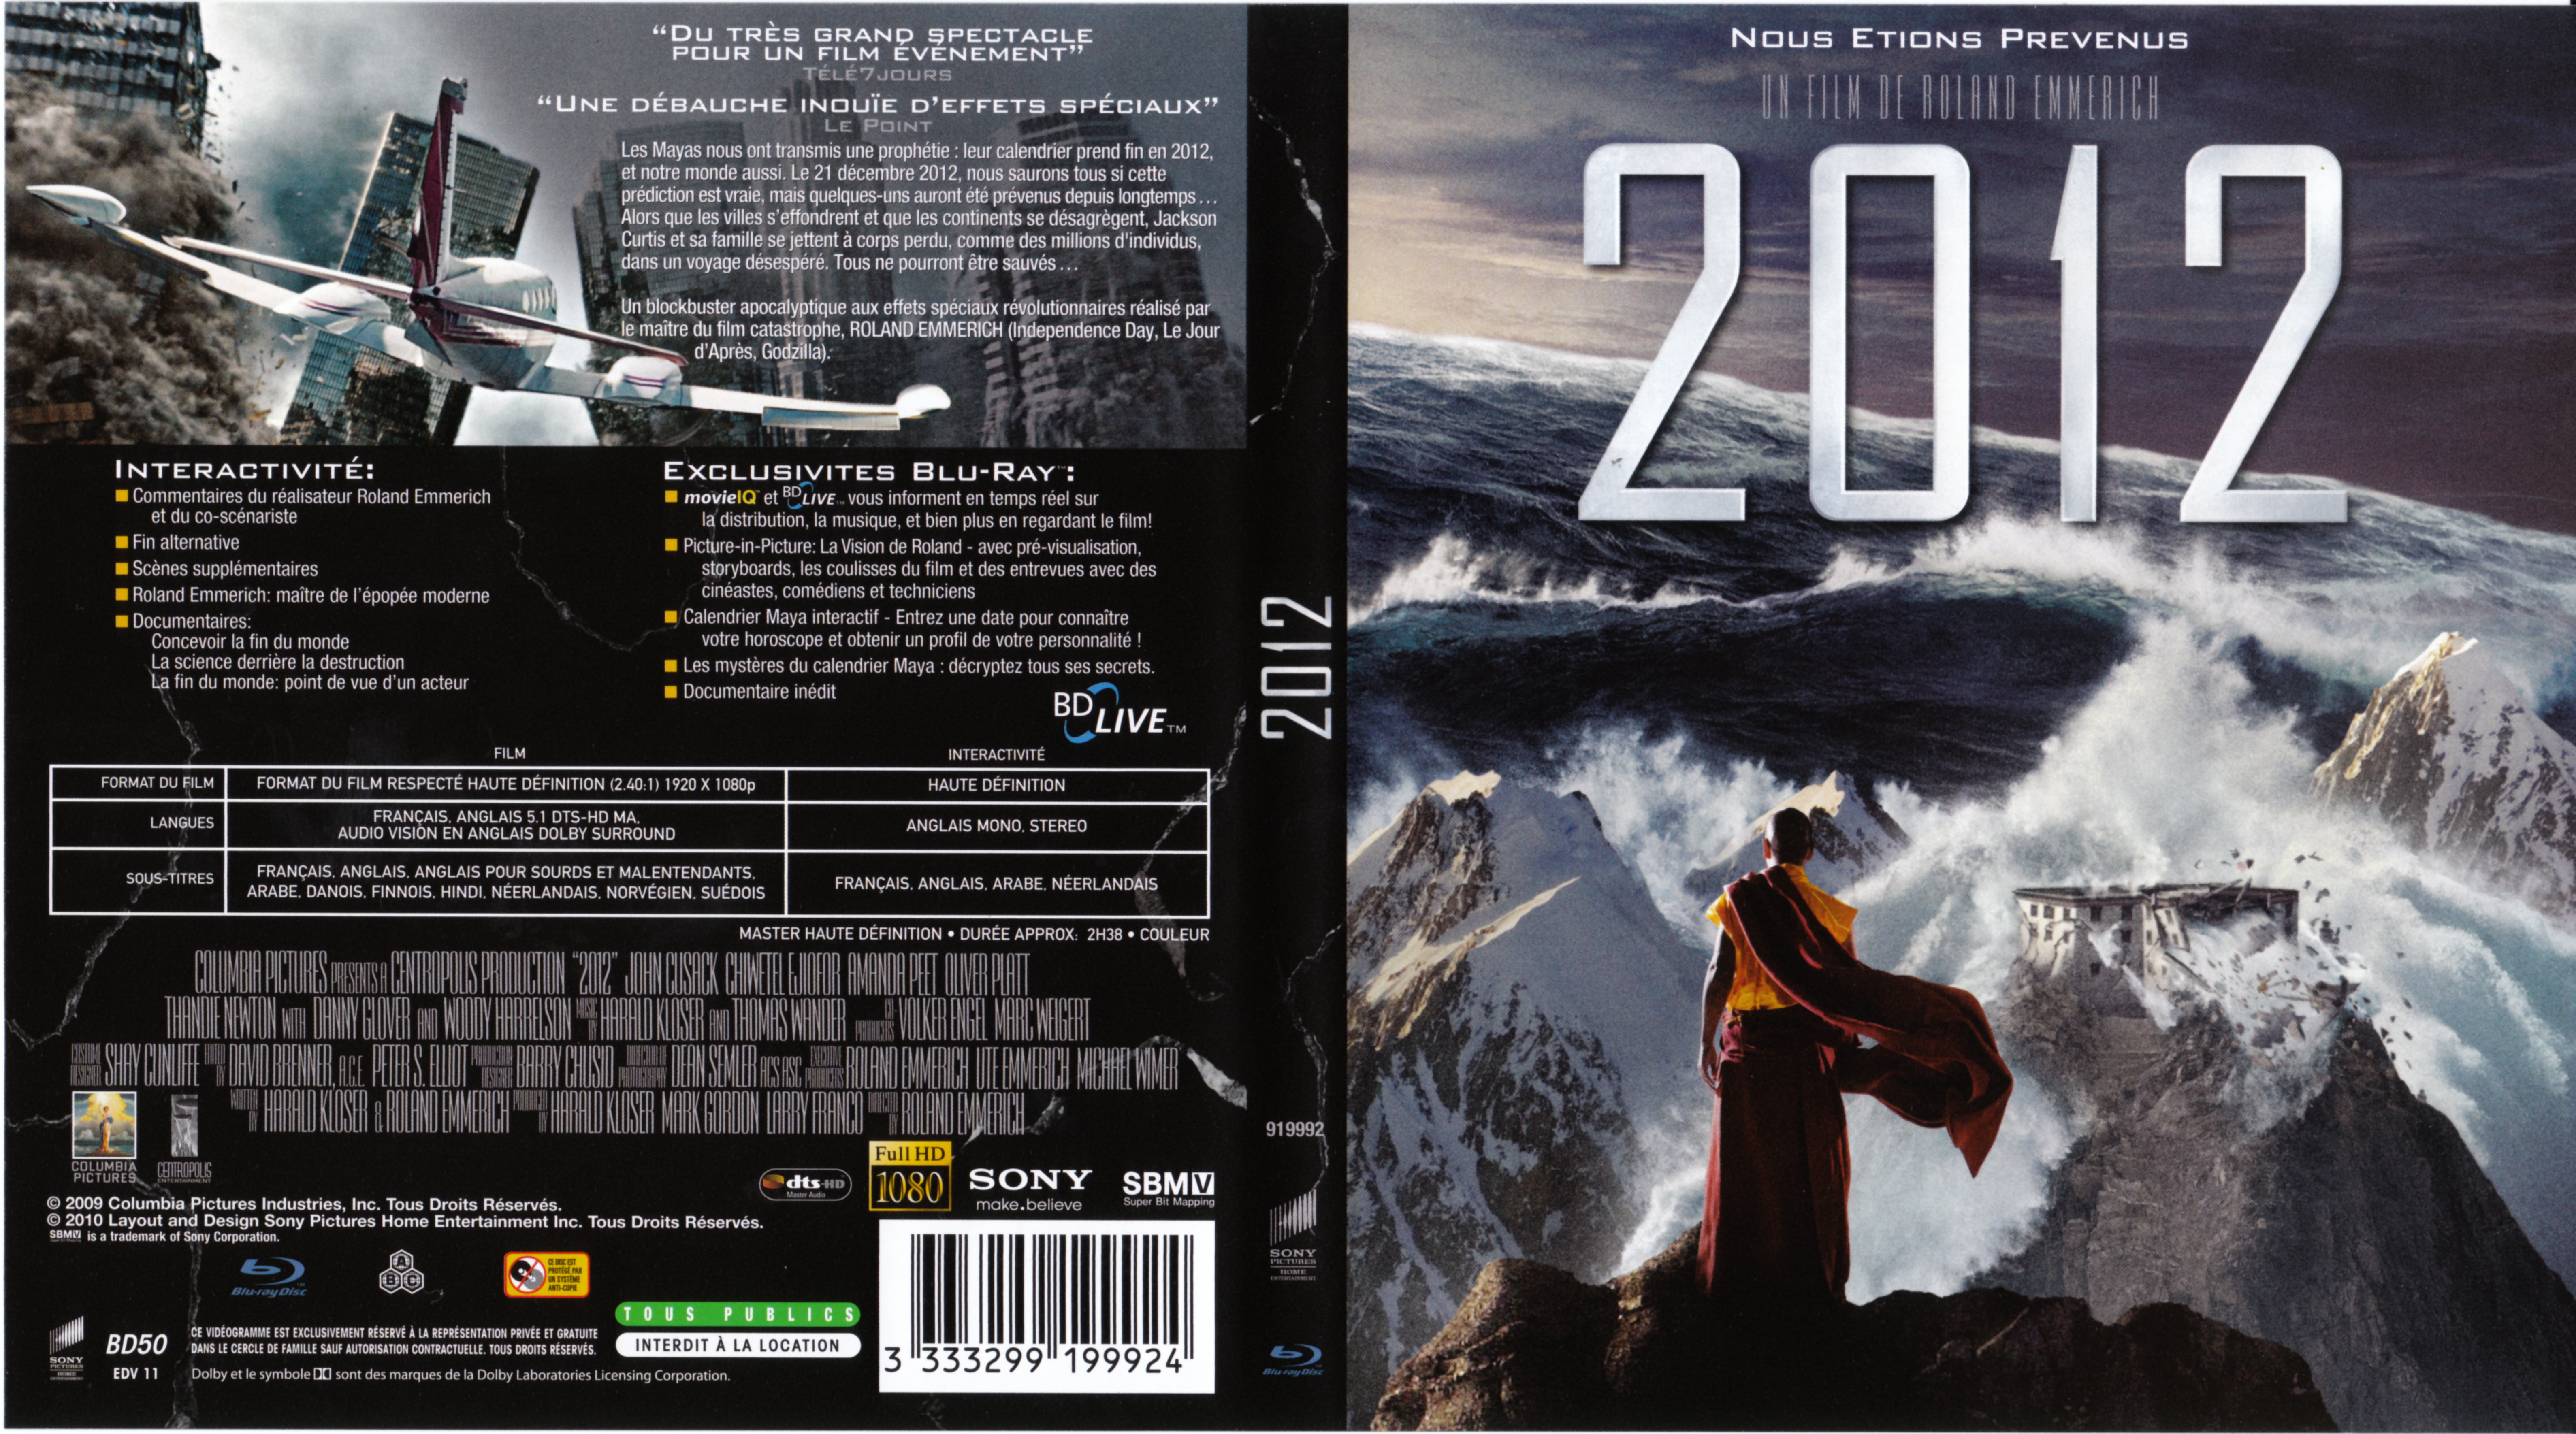 Jaquette DVD 2012 (BLU-RAY)